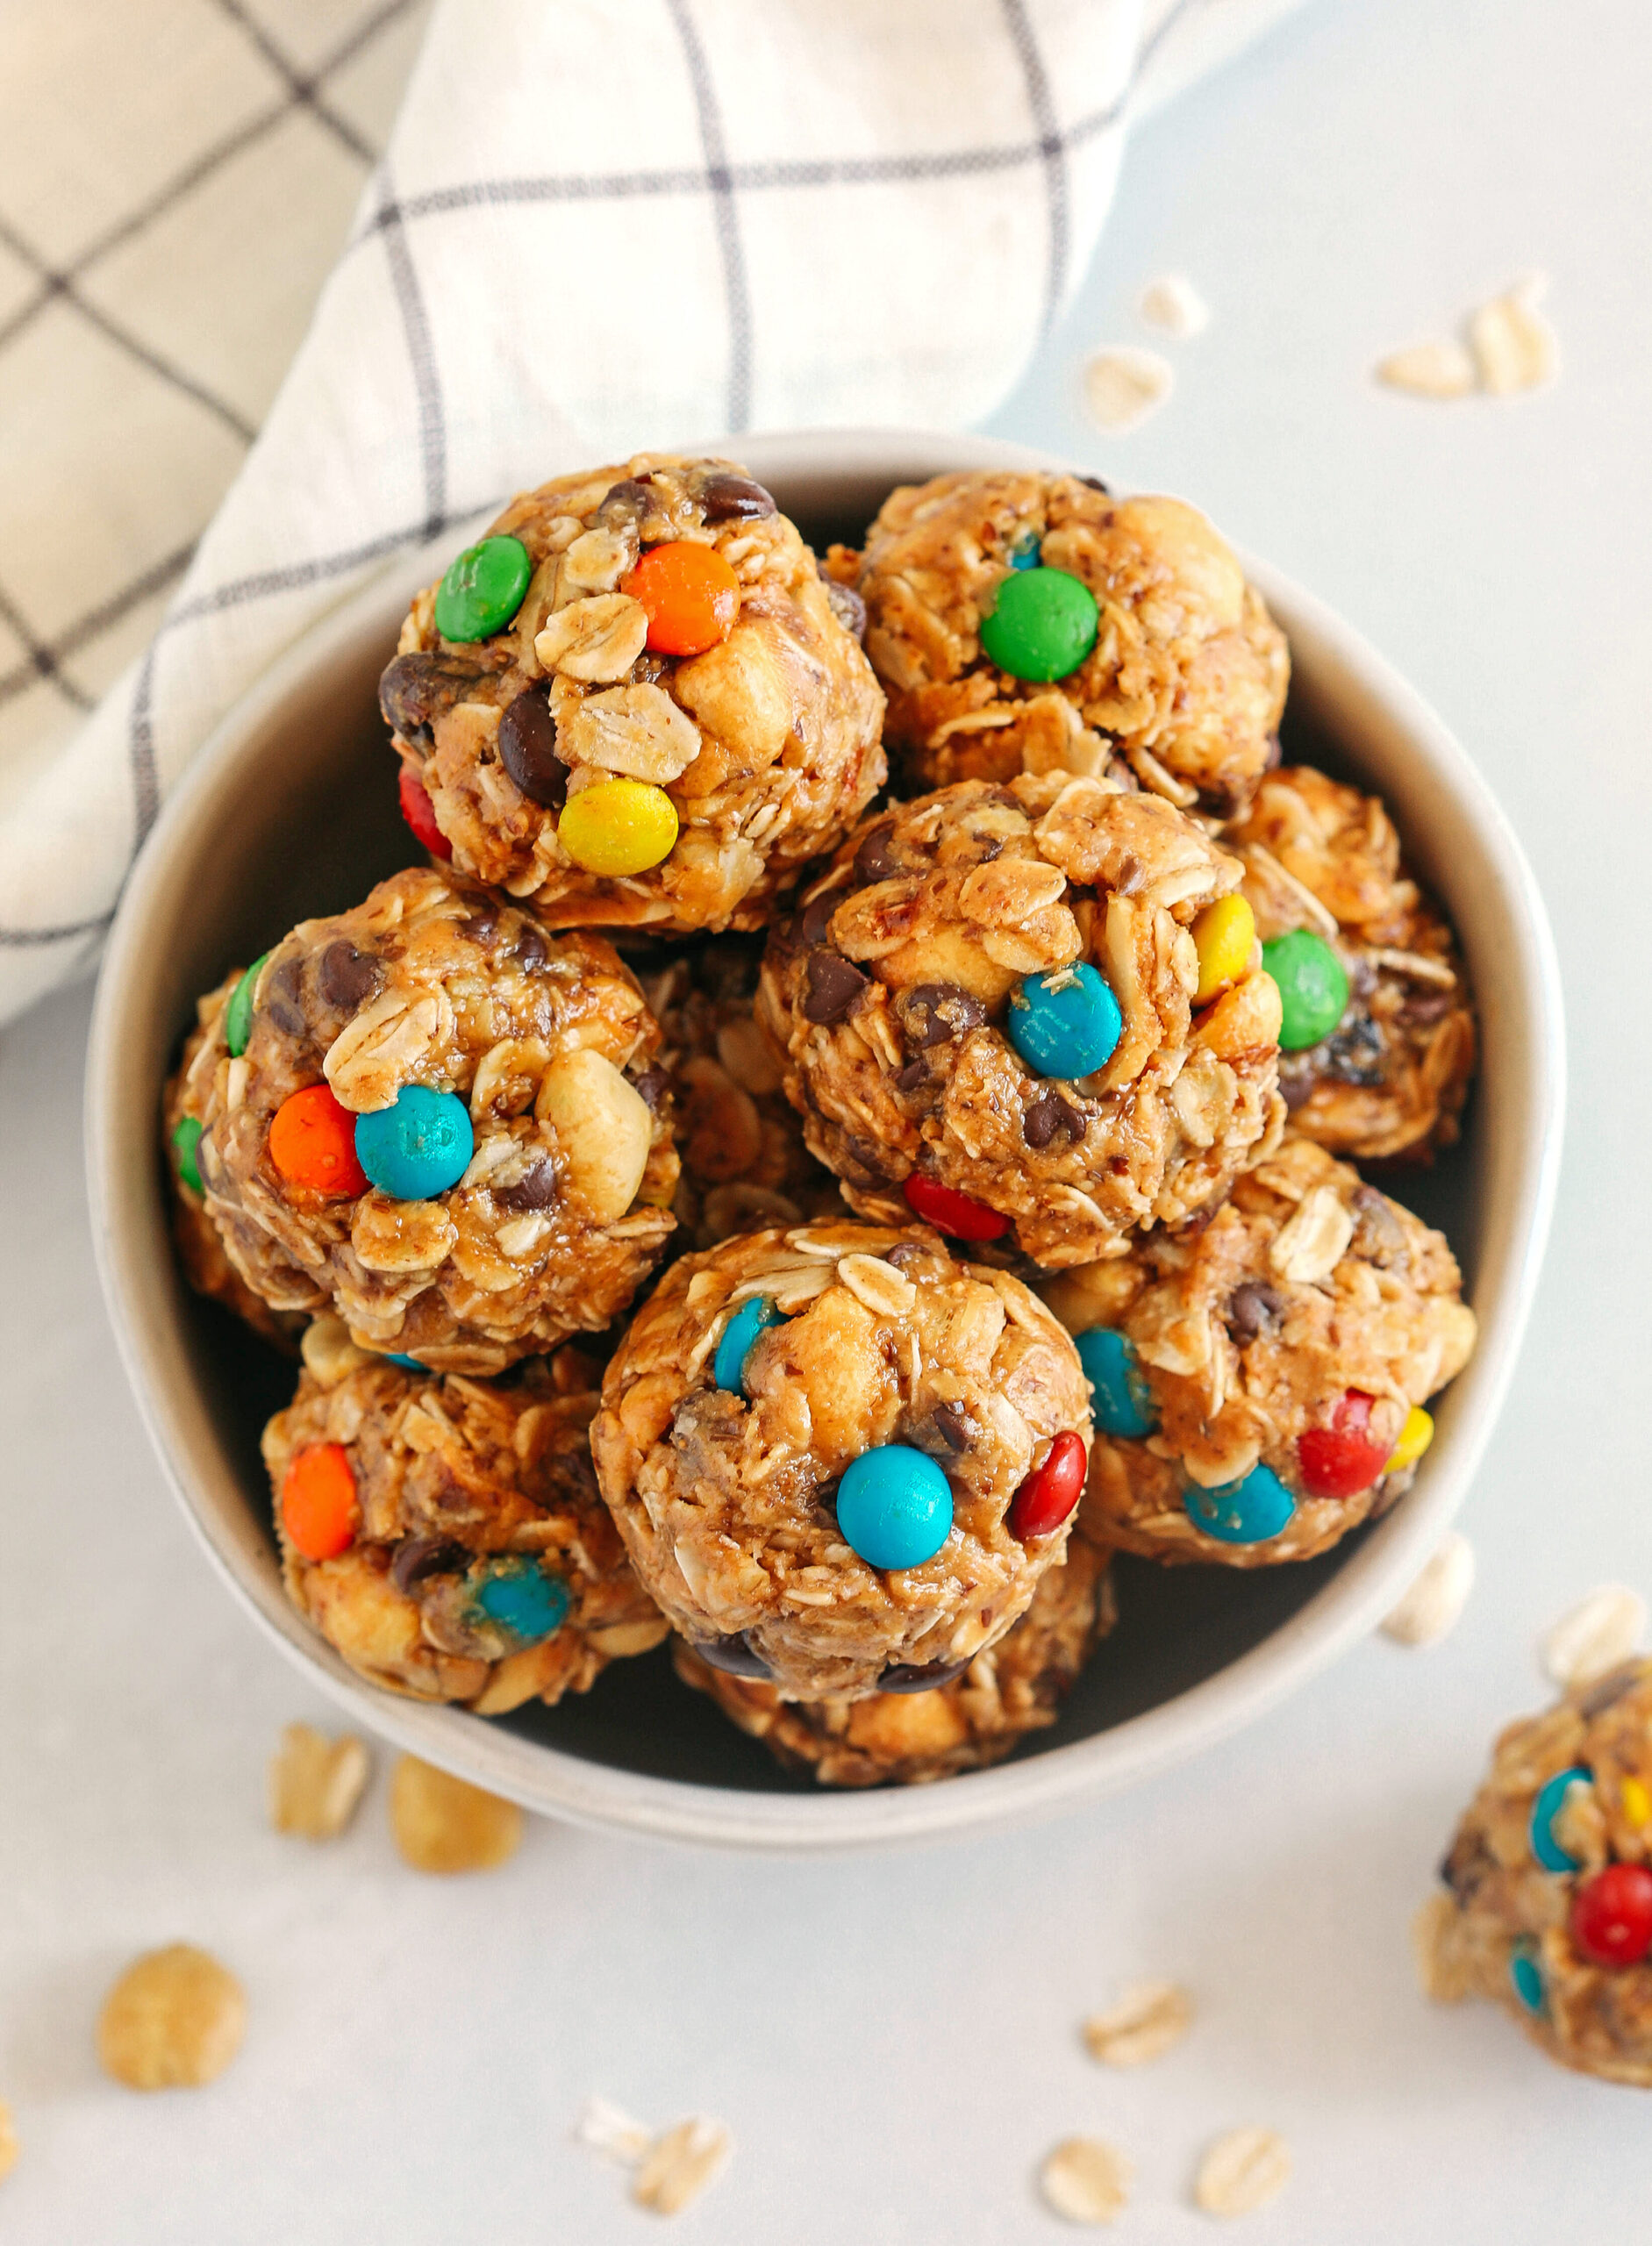 Delicious Peanut Butter Trail Mix Balls easily made in just 15 minutes with a few simple ingredients!  Perfect back-to-school snack that your kids will love!